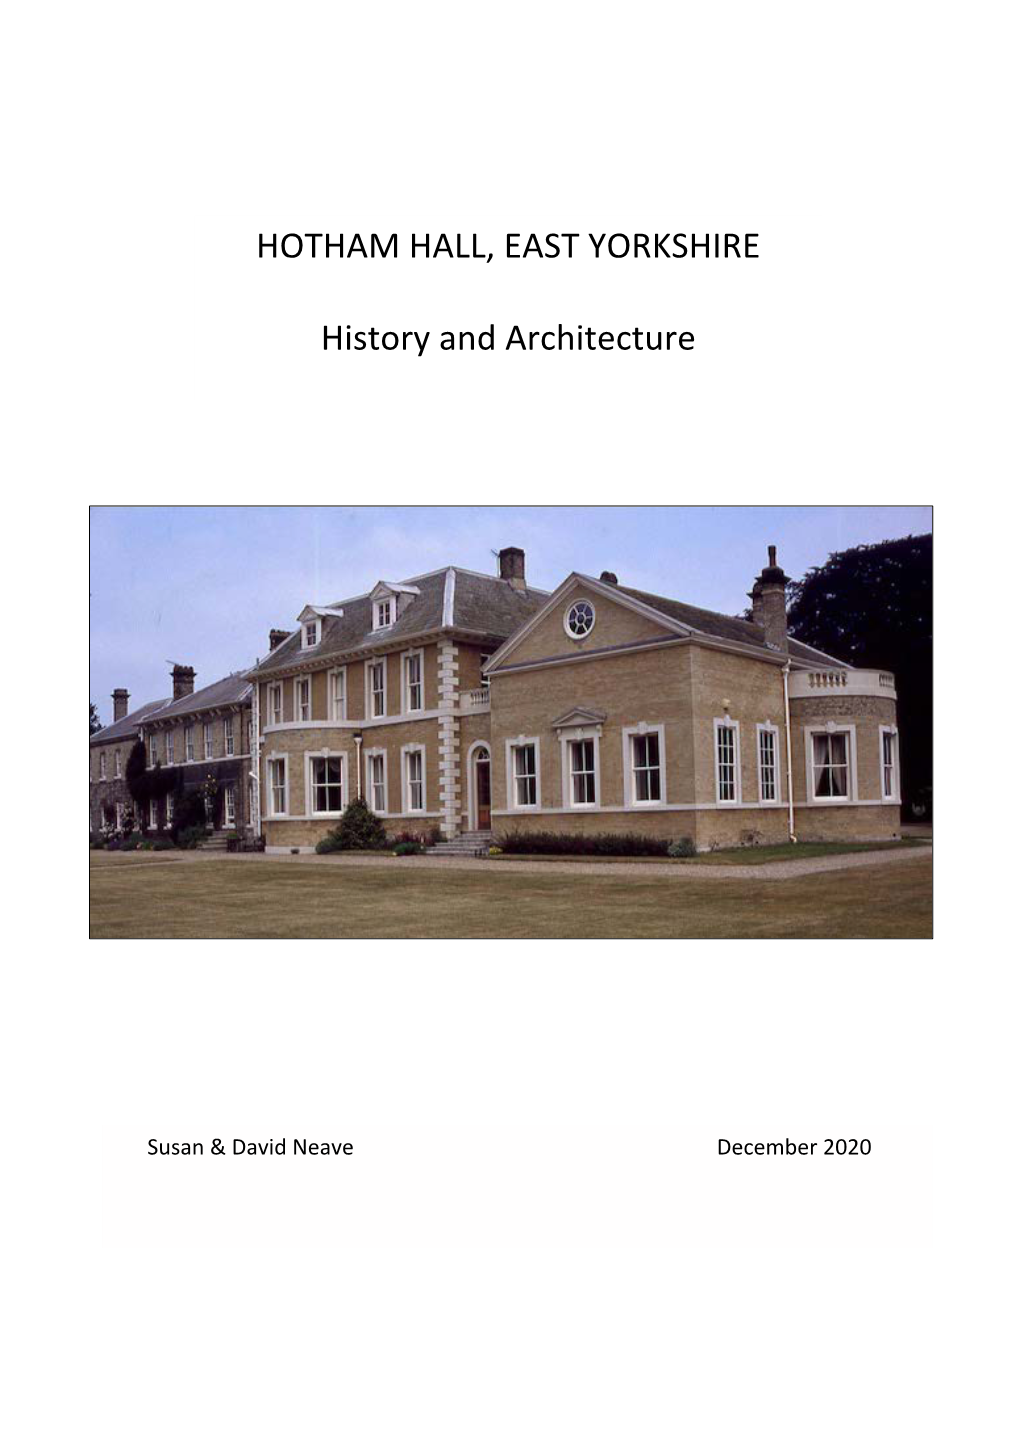 HOTHAM HALL, EAST YORKSHIRE History and Architecture